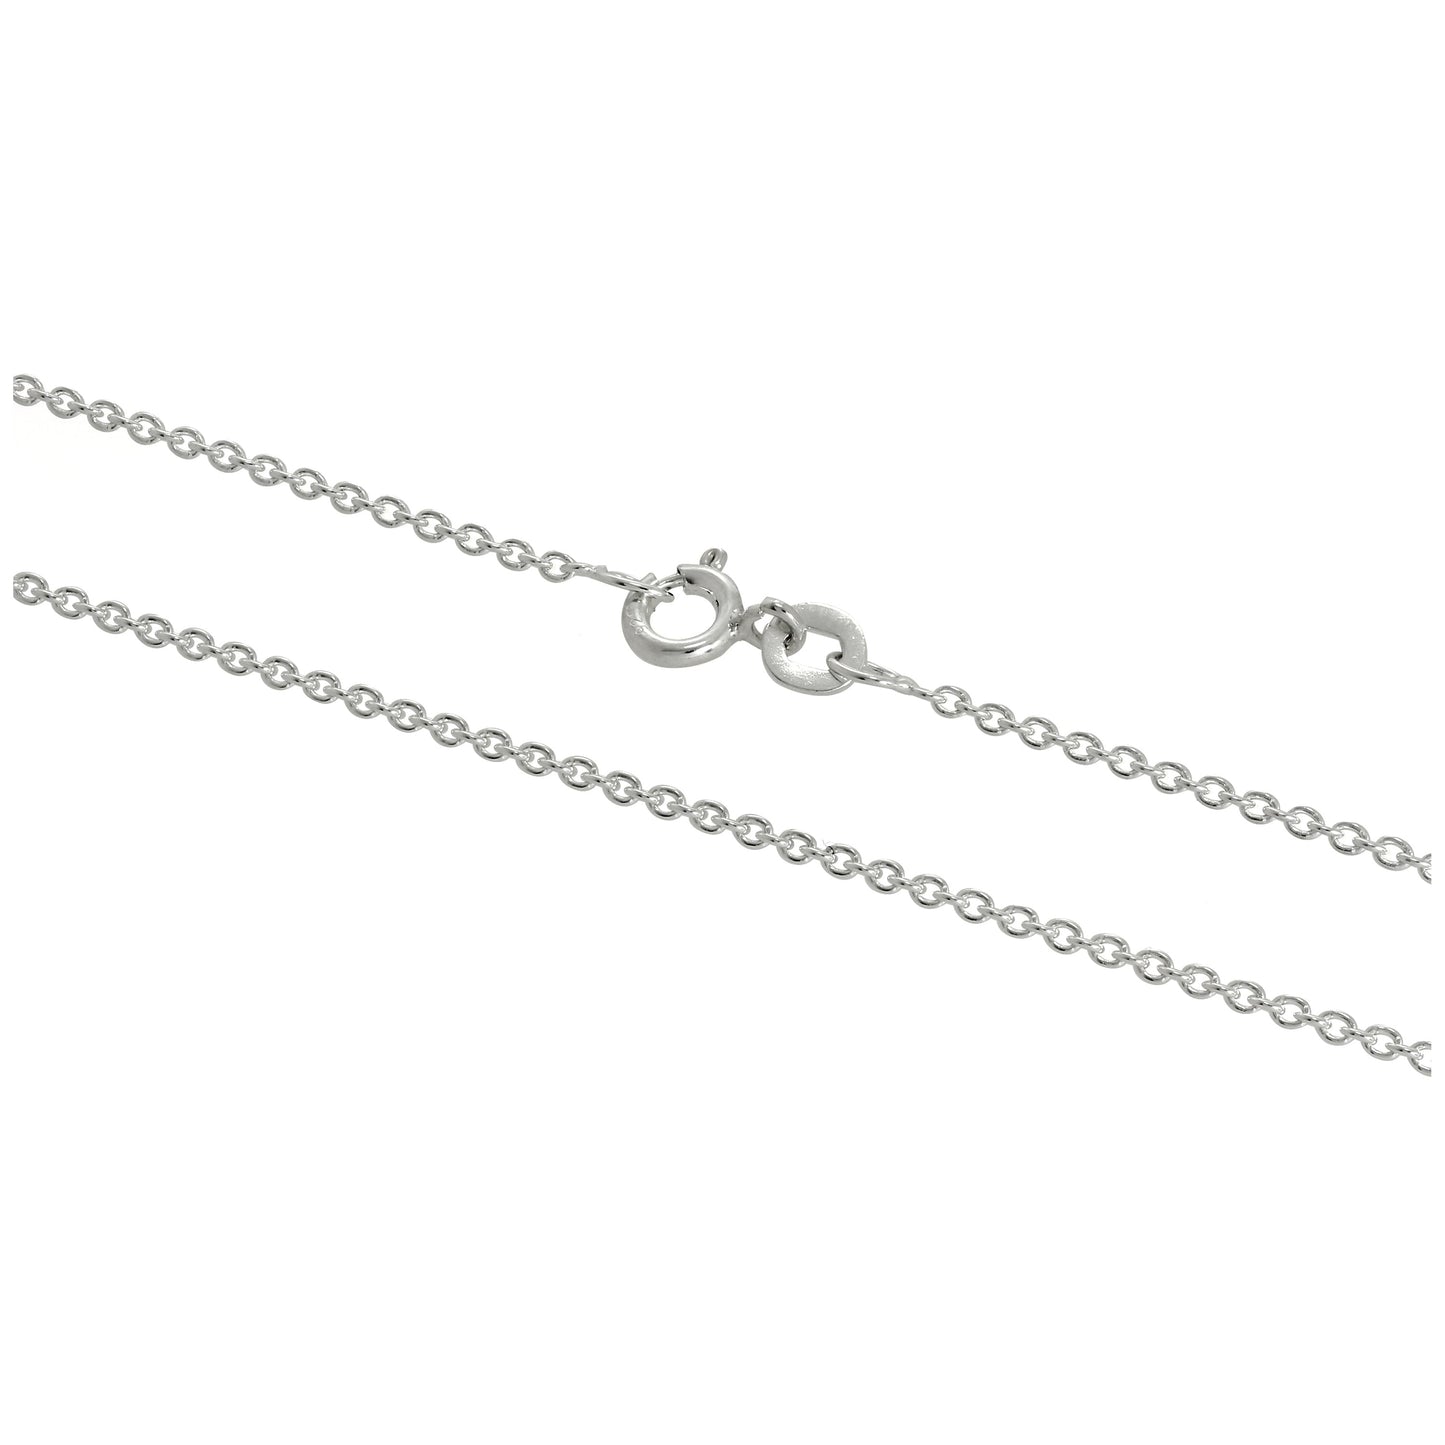 Sterling Silver 1mm Belcher Chain 16 - 24 Inches